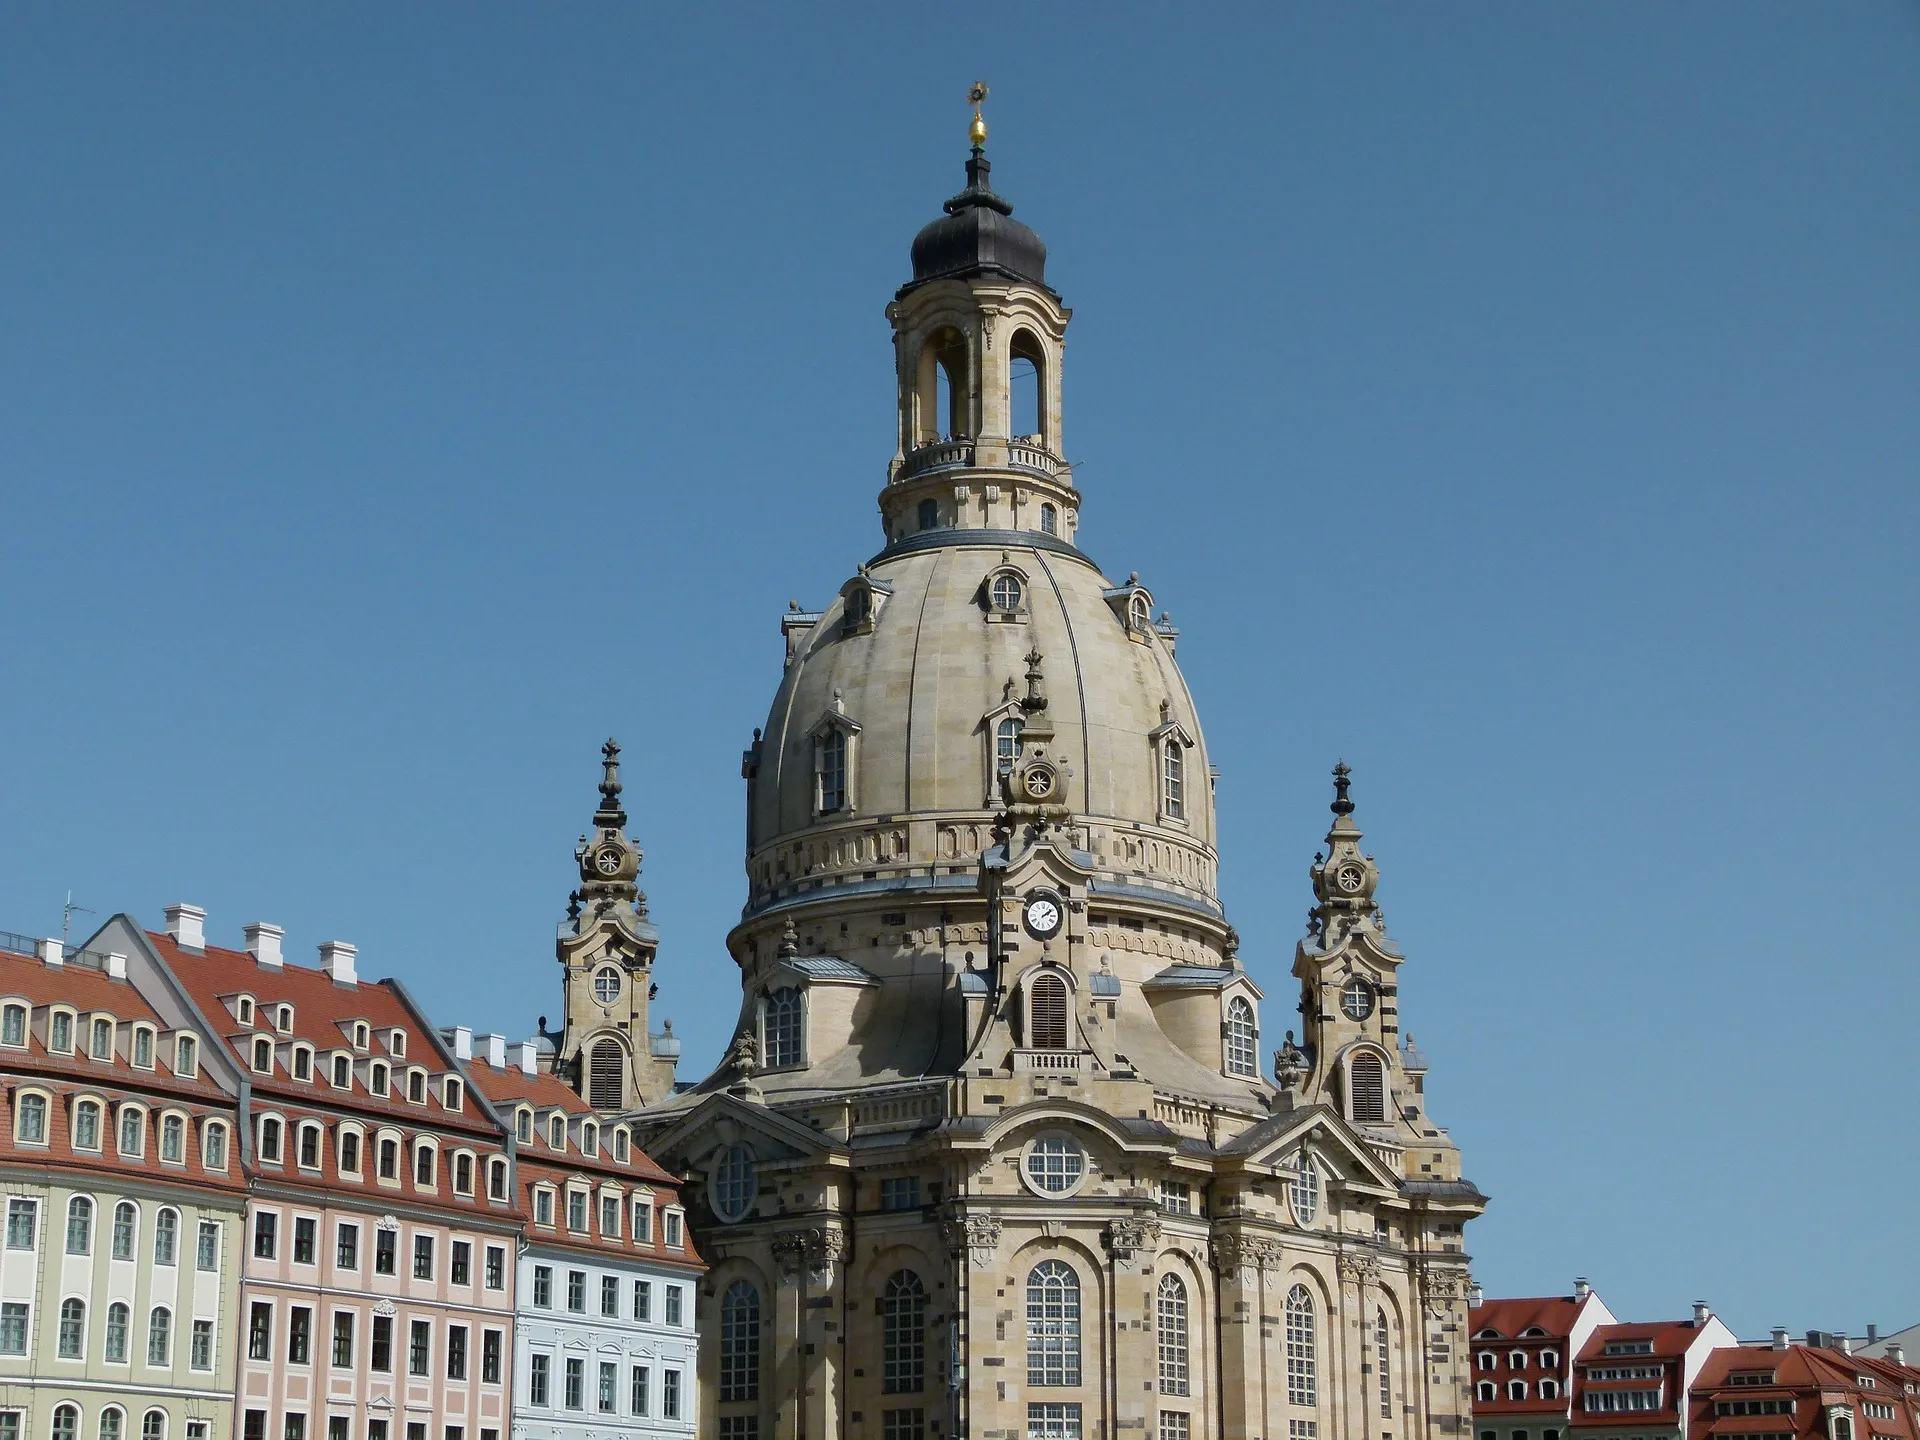 “Frauenkirche” or “Church of our Lady” in Dresden’s historical city center.